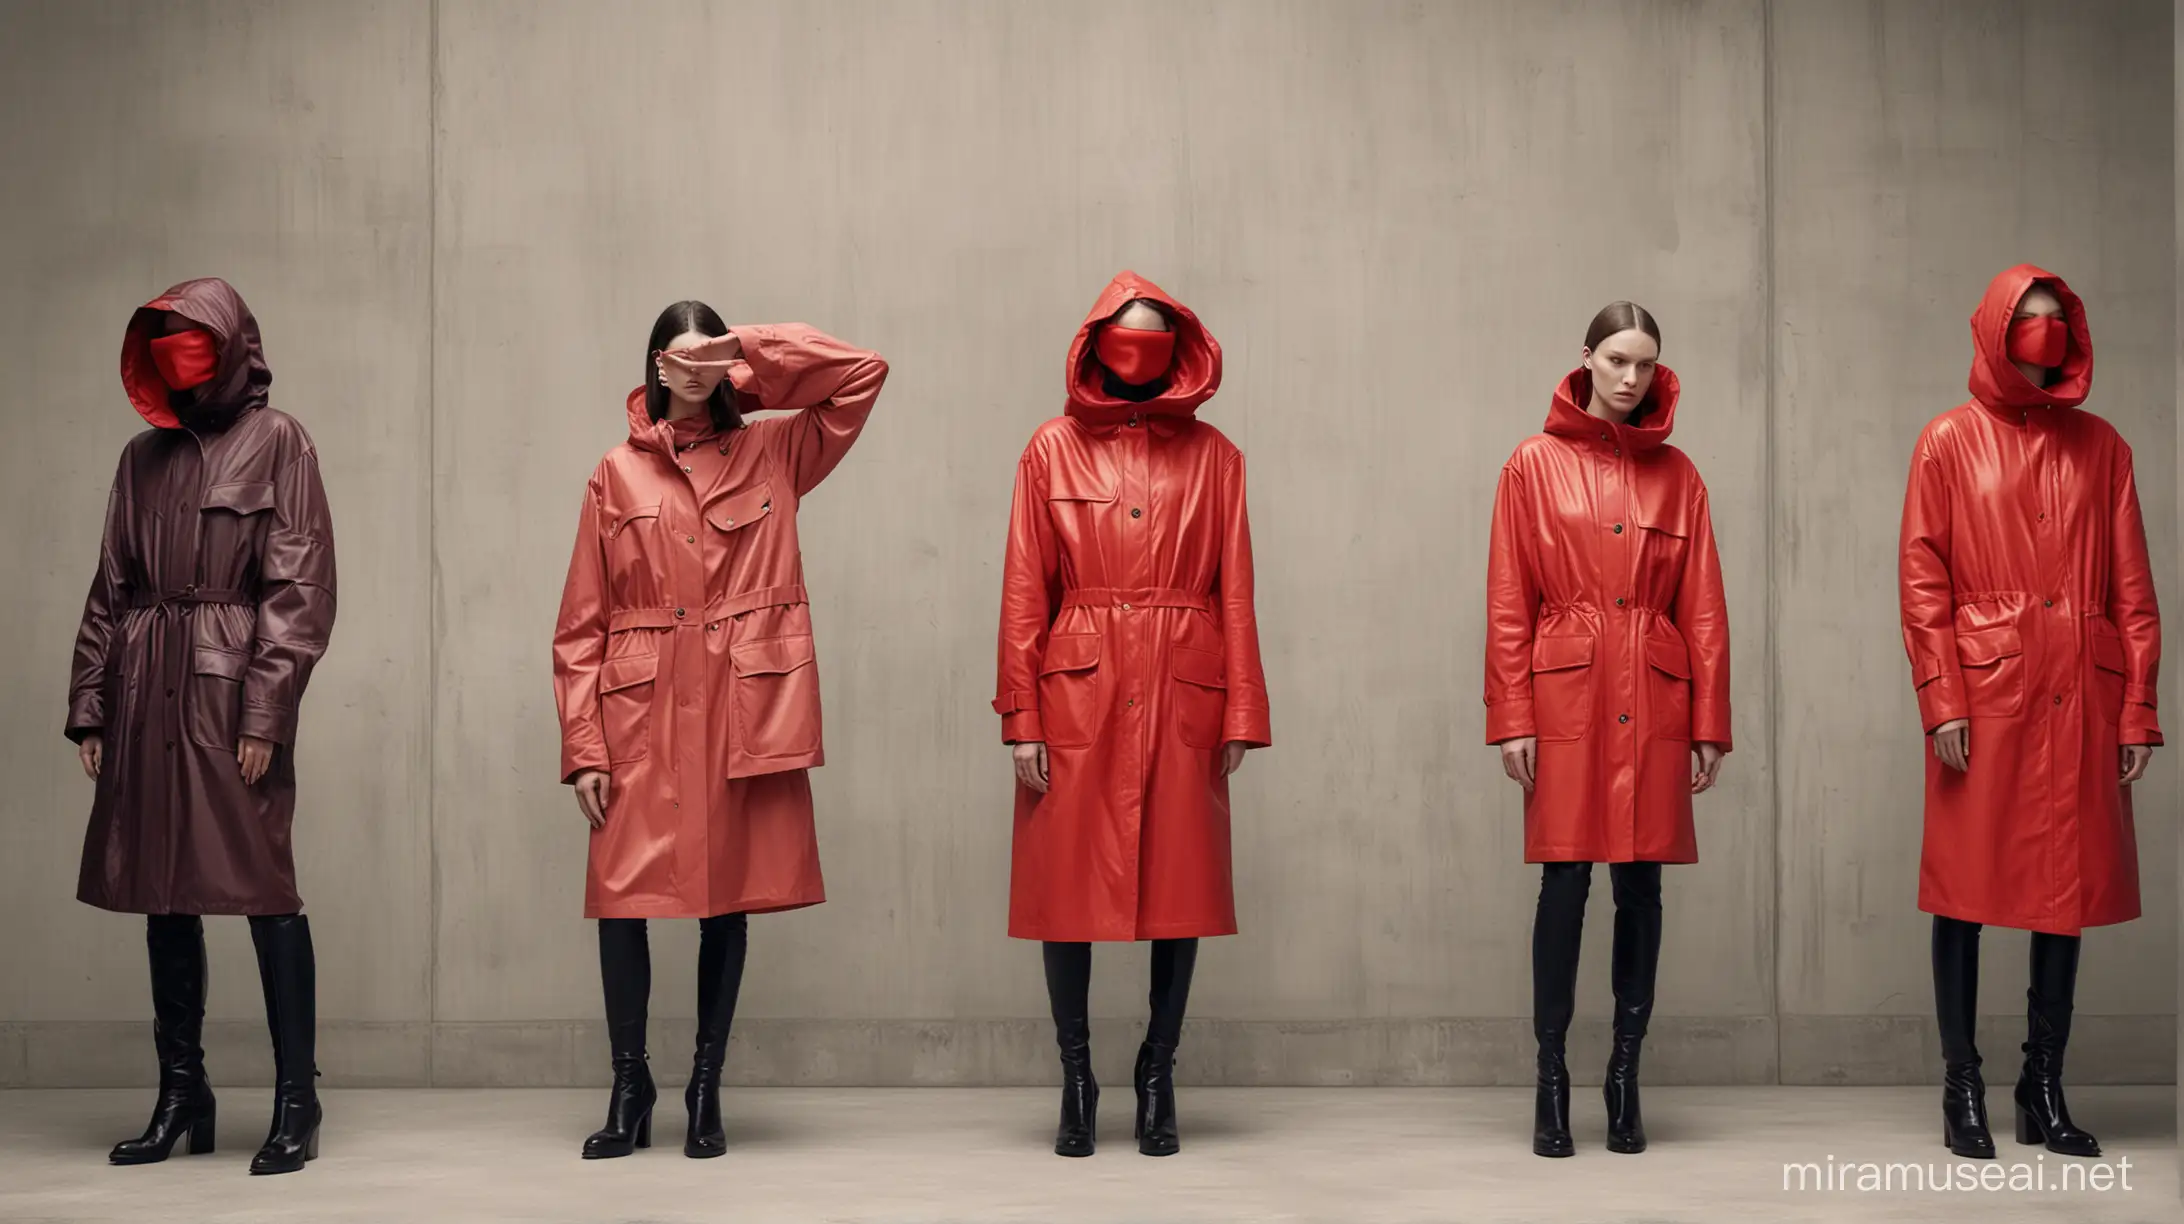 Surreal Balenciaga Fashion Oversize Apparel and Concealed Faces in Minimalist Setting